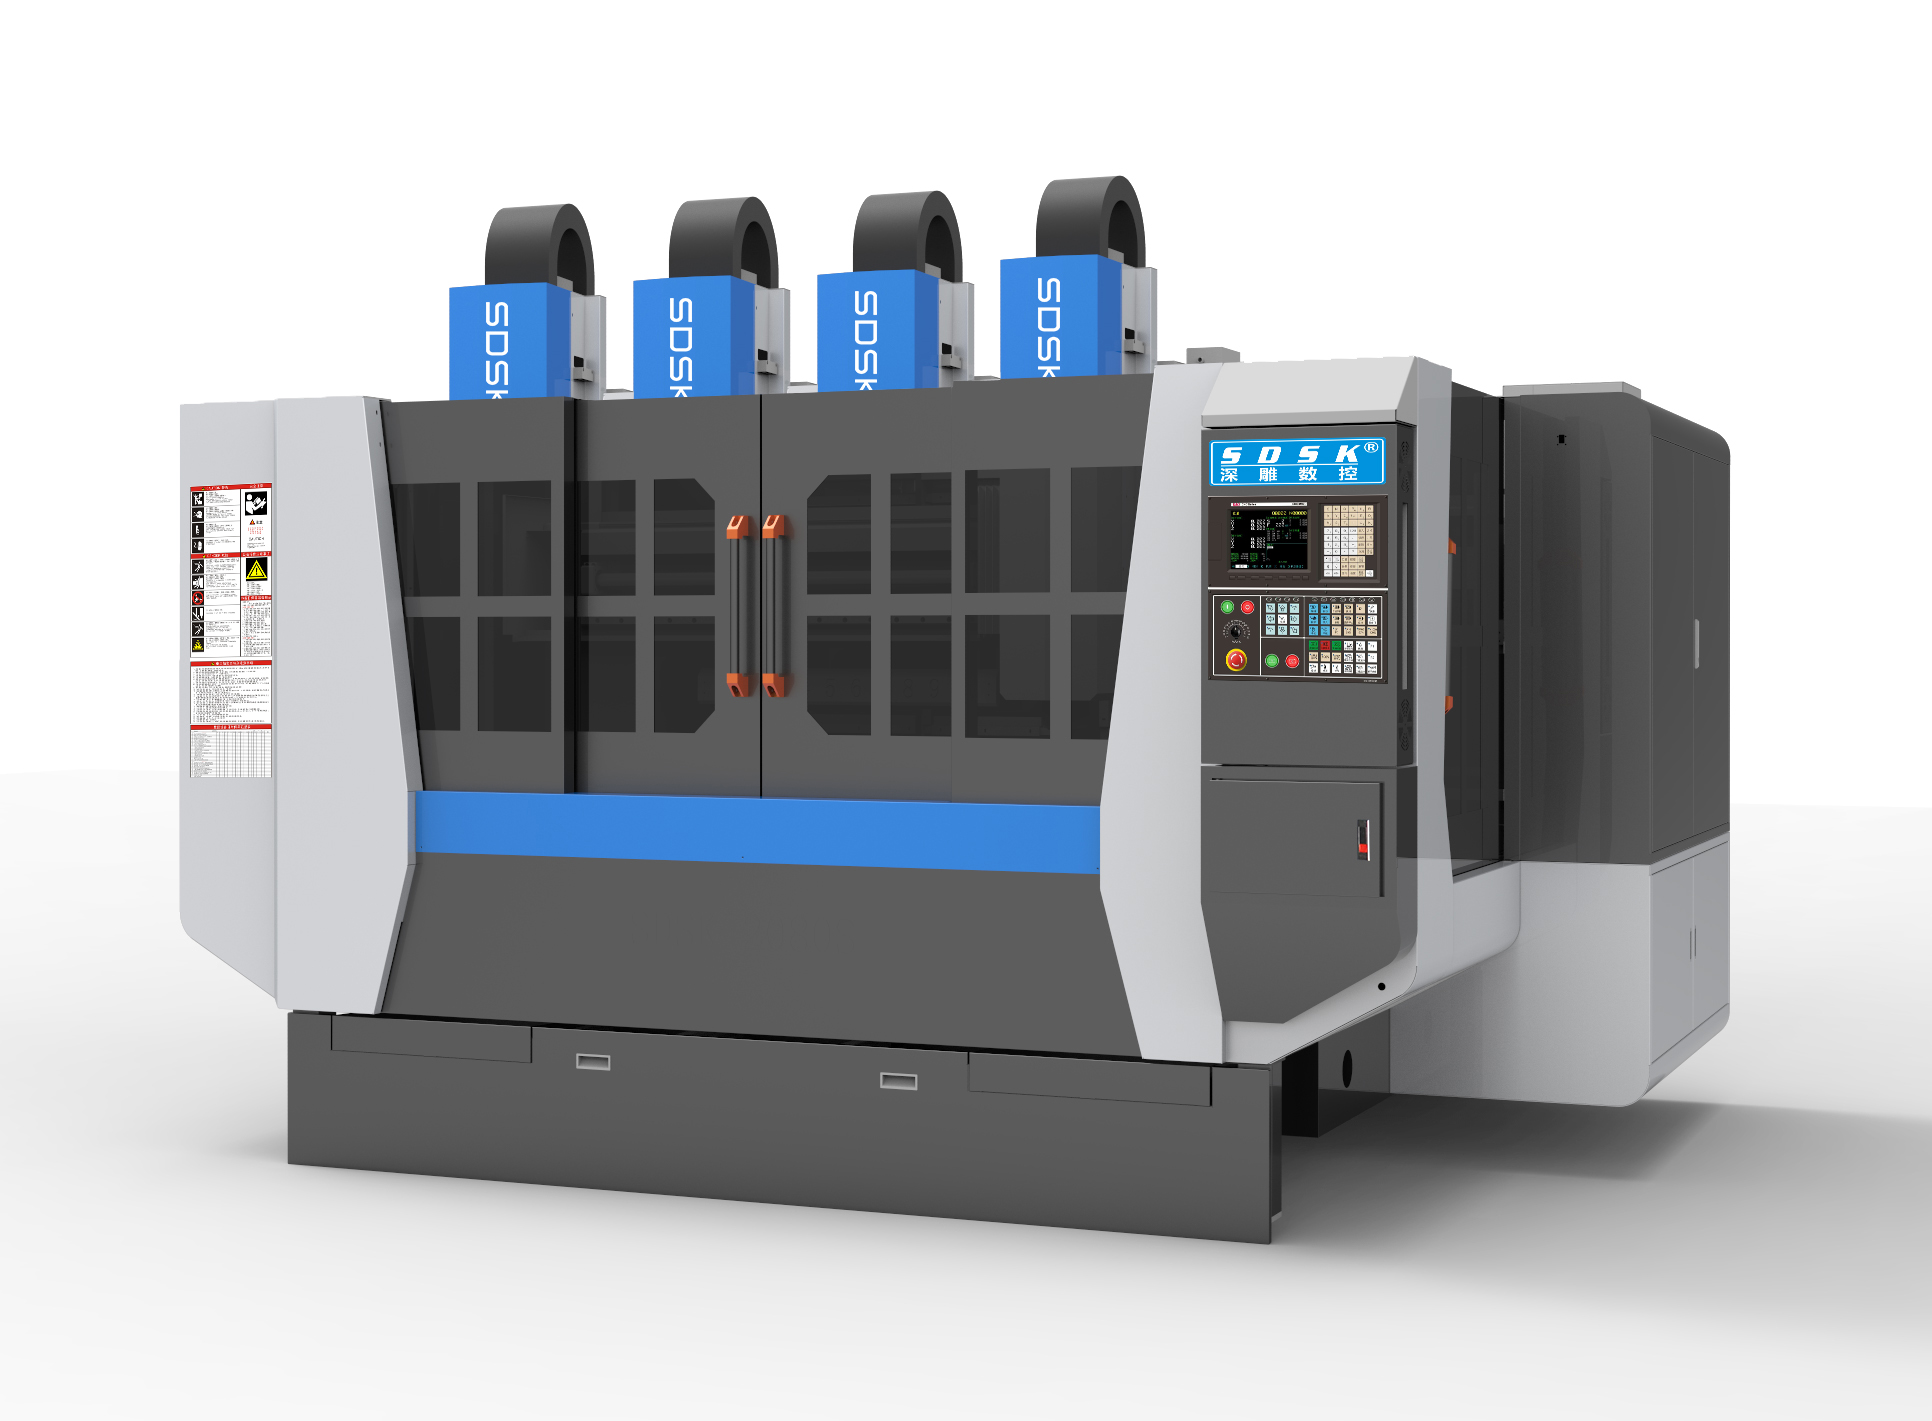 What are the specific advantages of a multi head engraving machine?